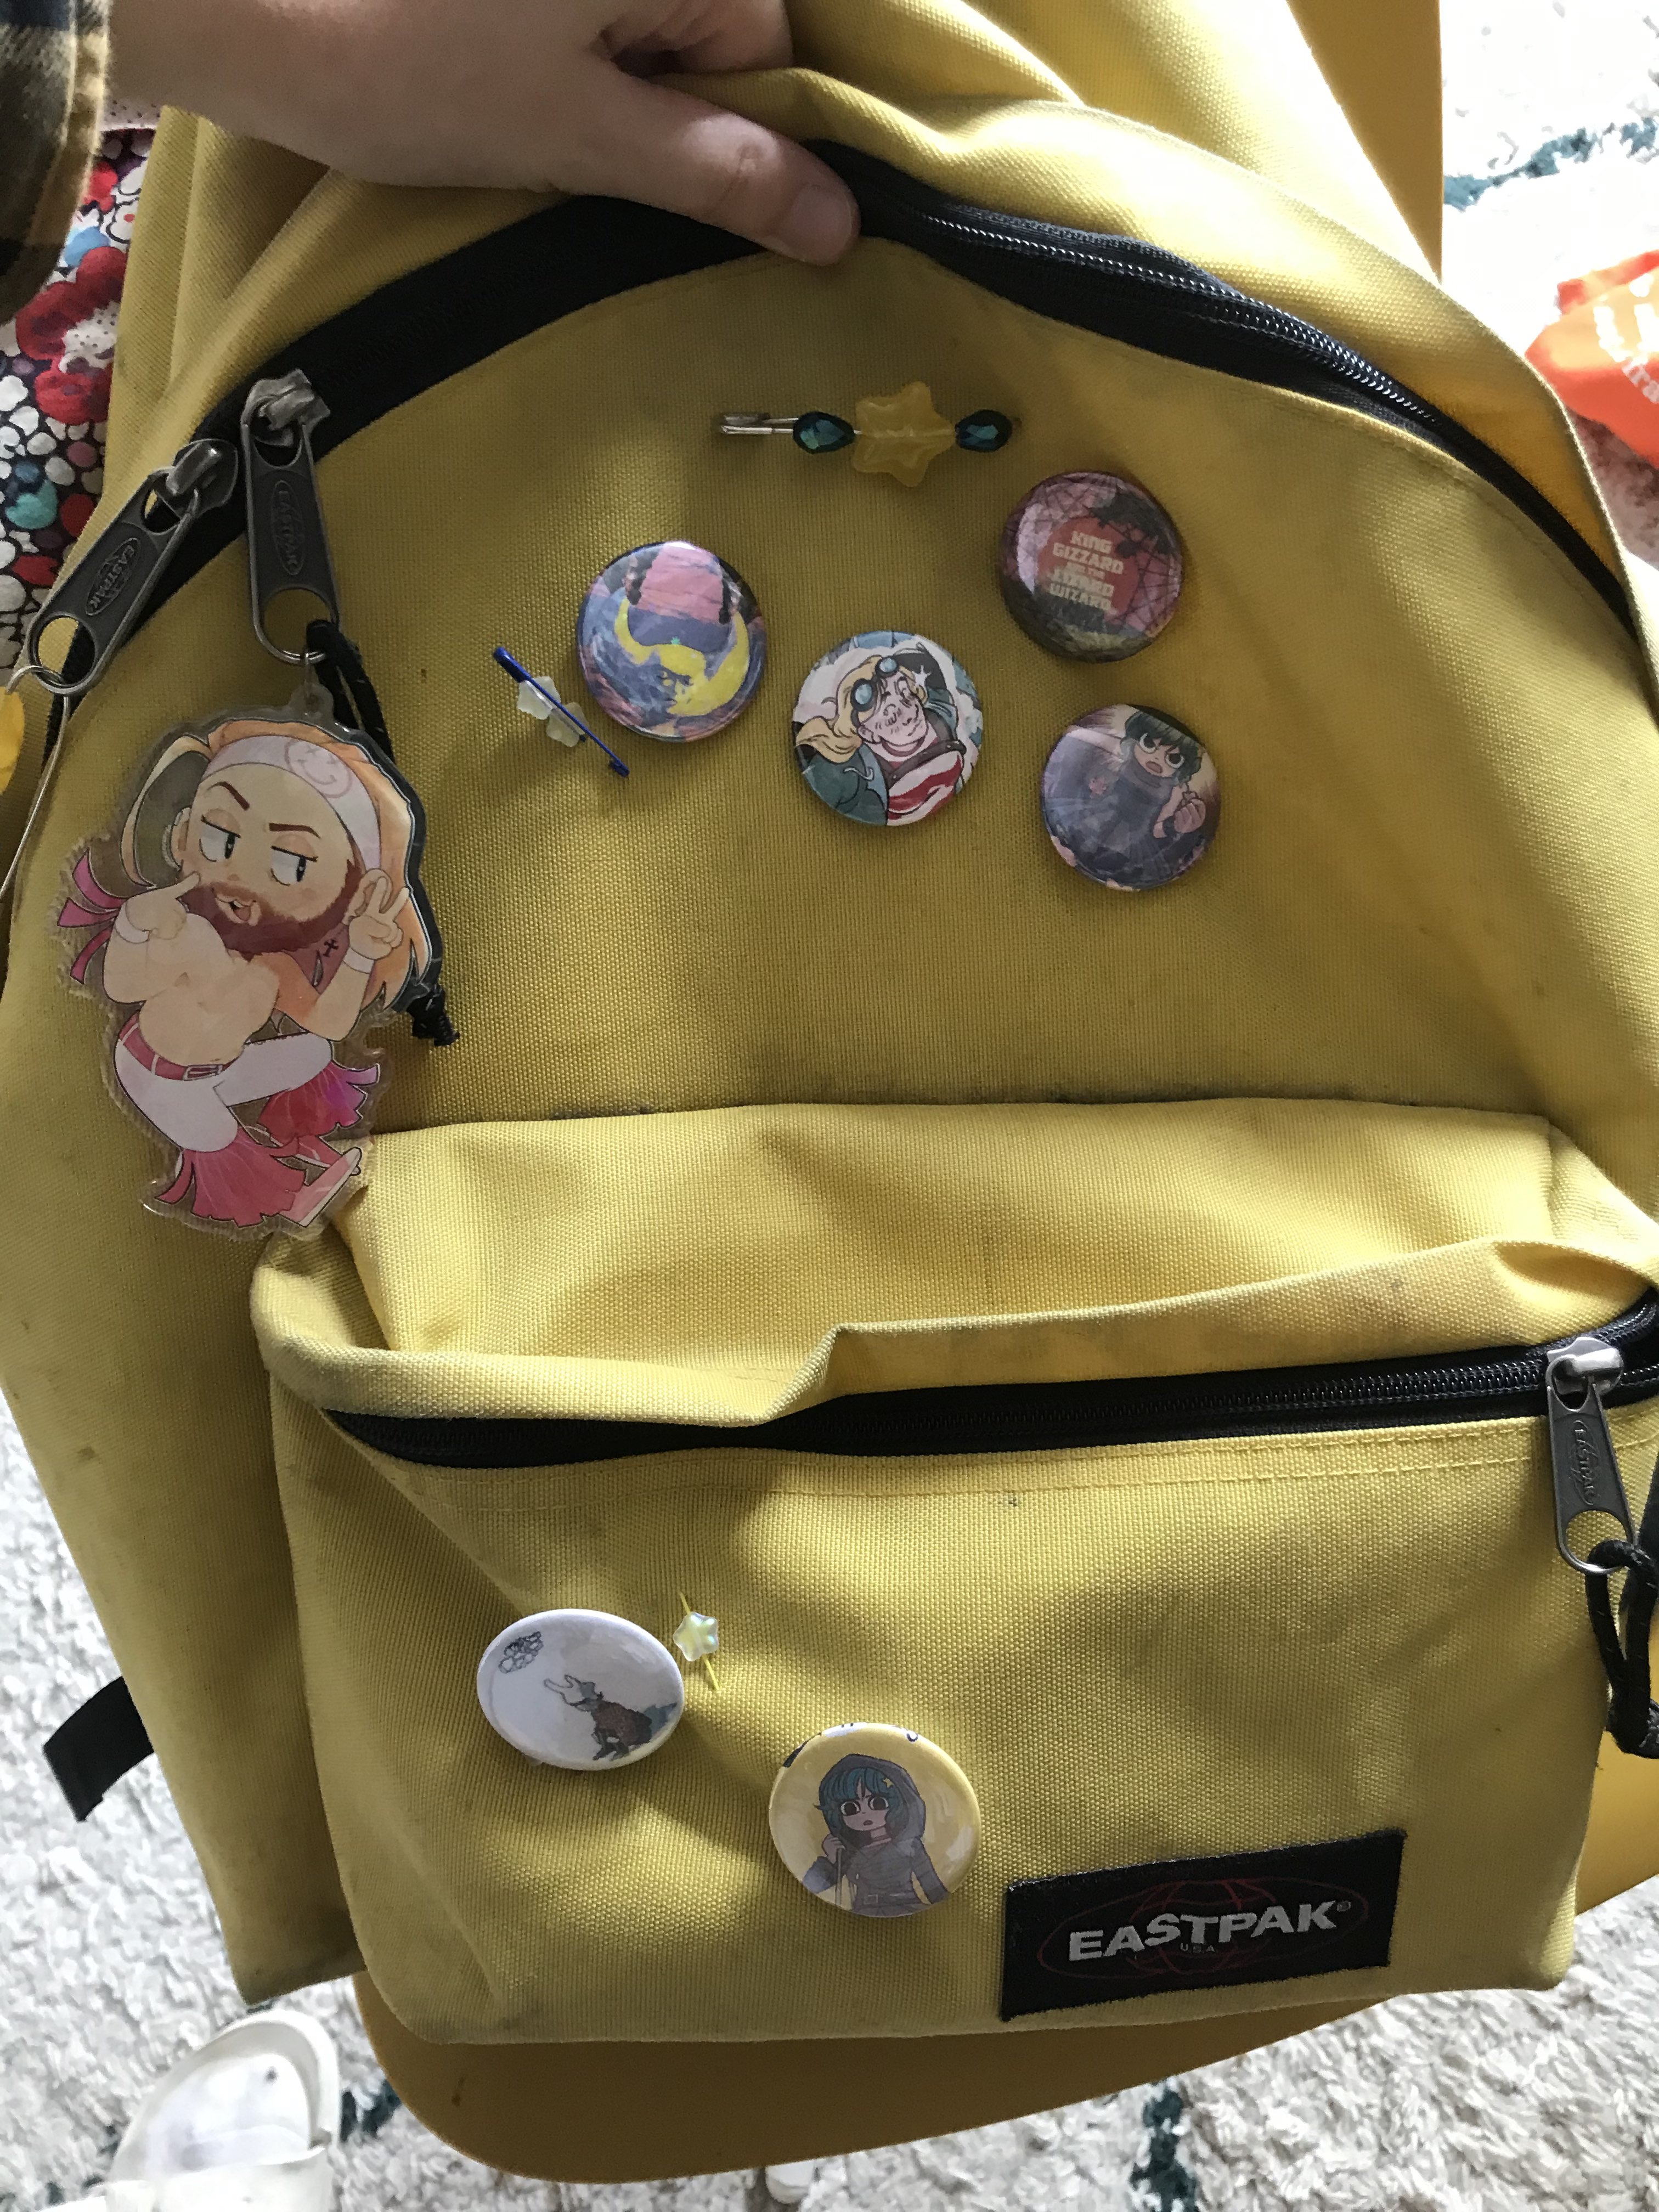 A photo of a yellow backpack with multiple round button badges on, with album covers, video game characters and comic panels on, some with holographic overlay on.